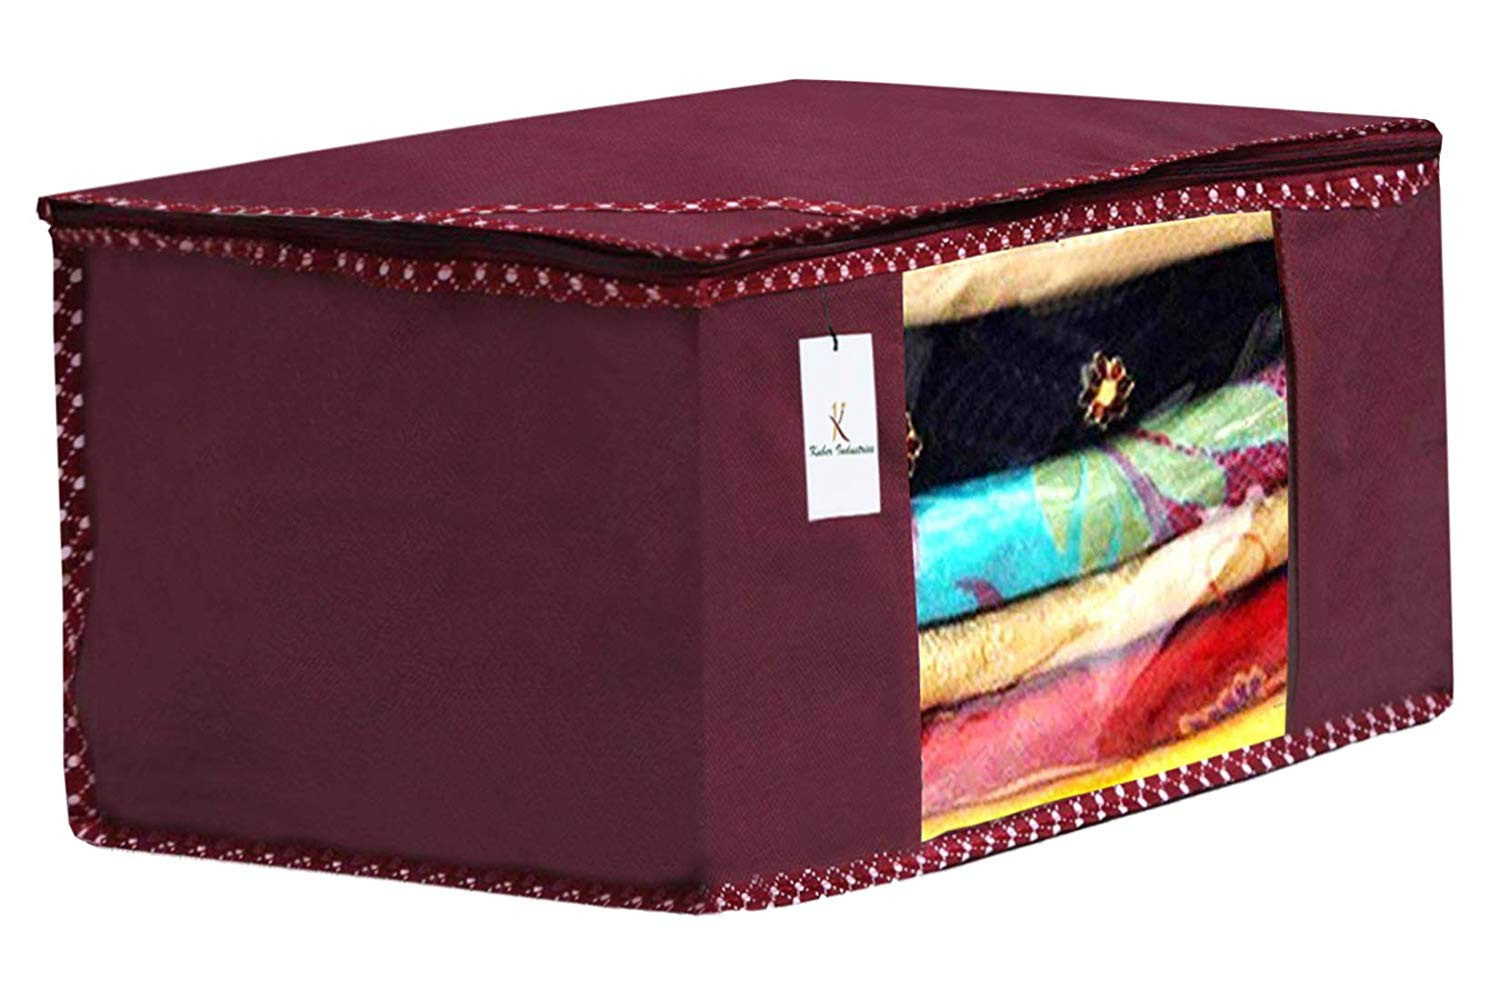 Kuber Industries Non Woven Saree Cover And Underbed Storage Bag, Cloth Organizer For Storage, Blanket Cover Combo Set (Maroon) -CTKTC38451